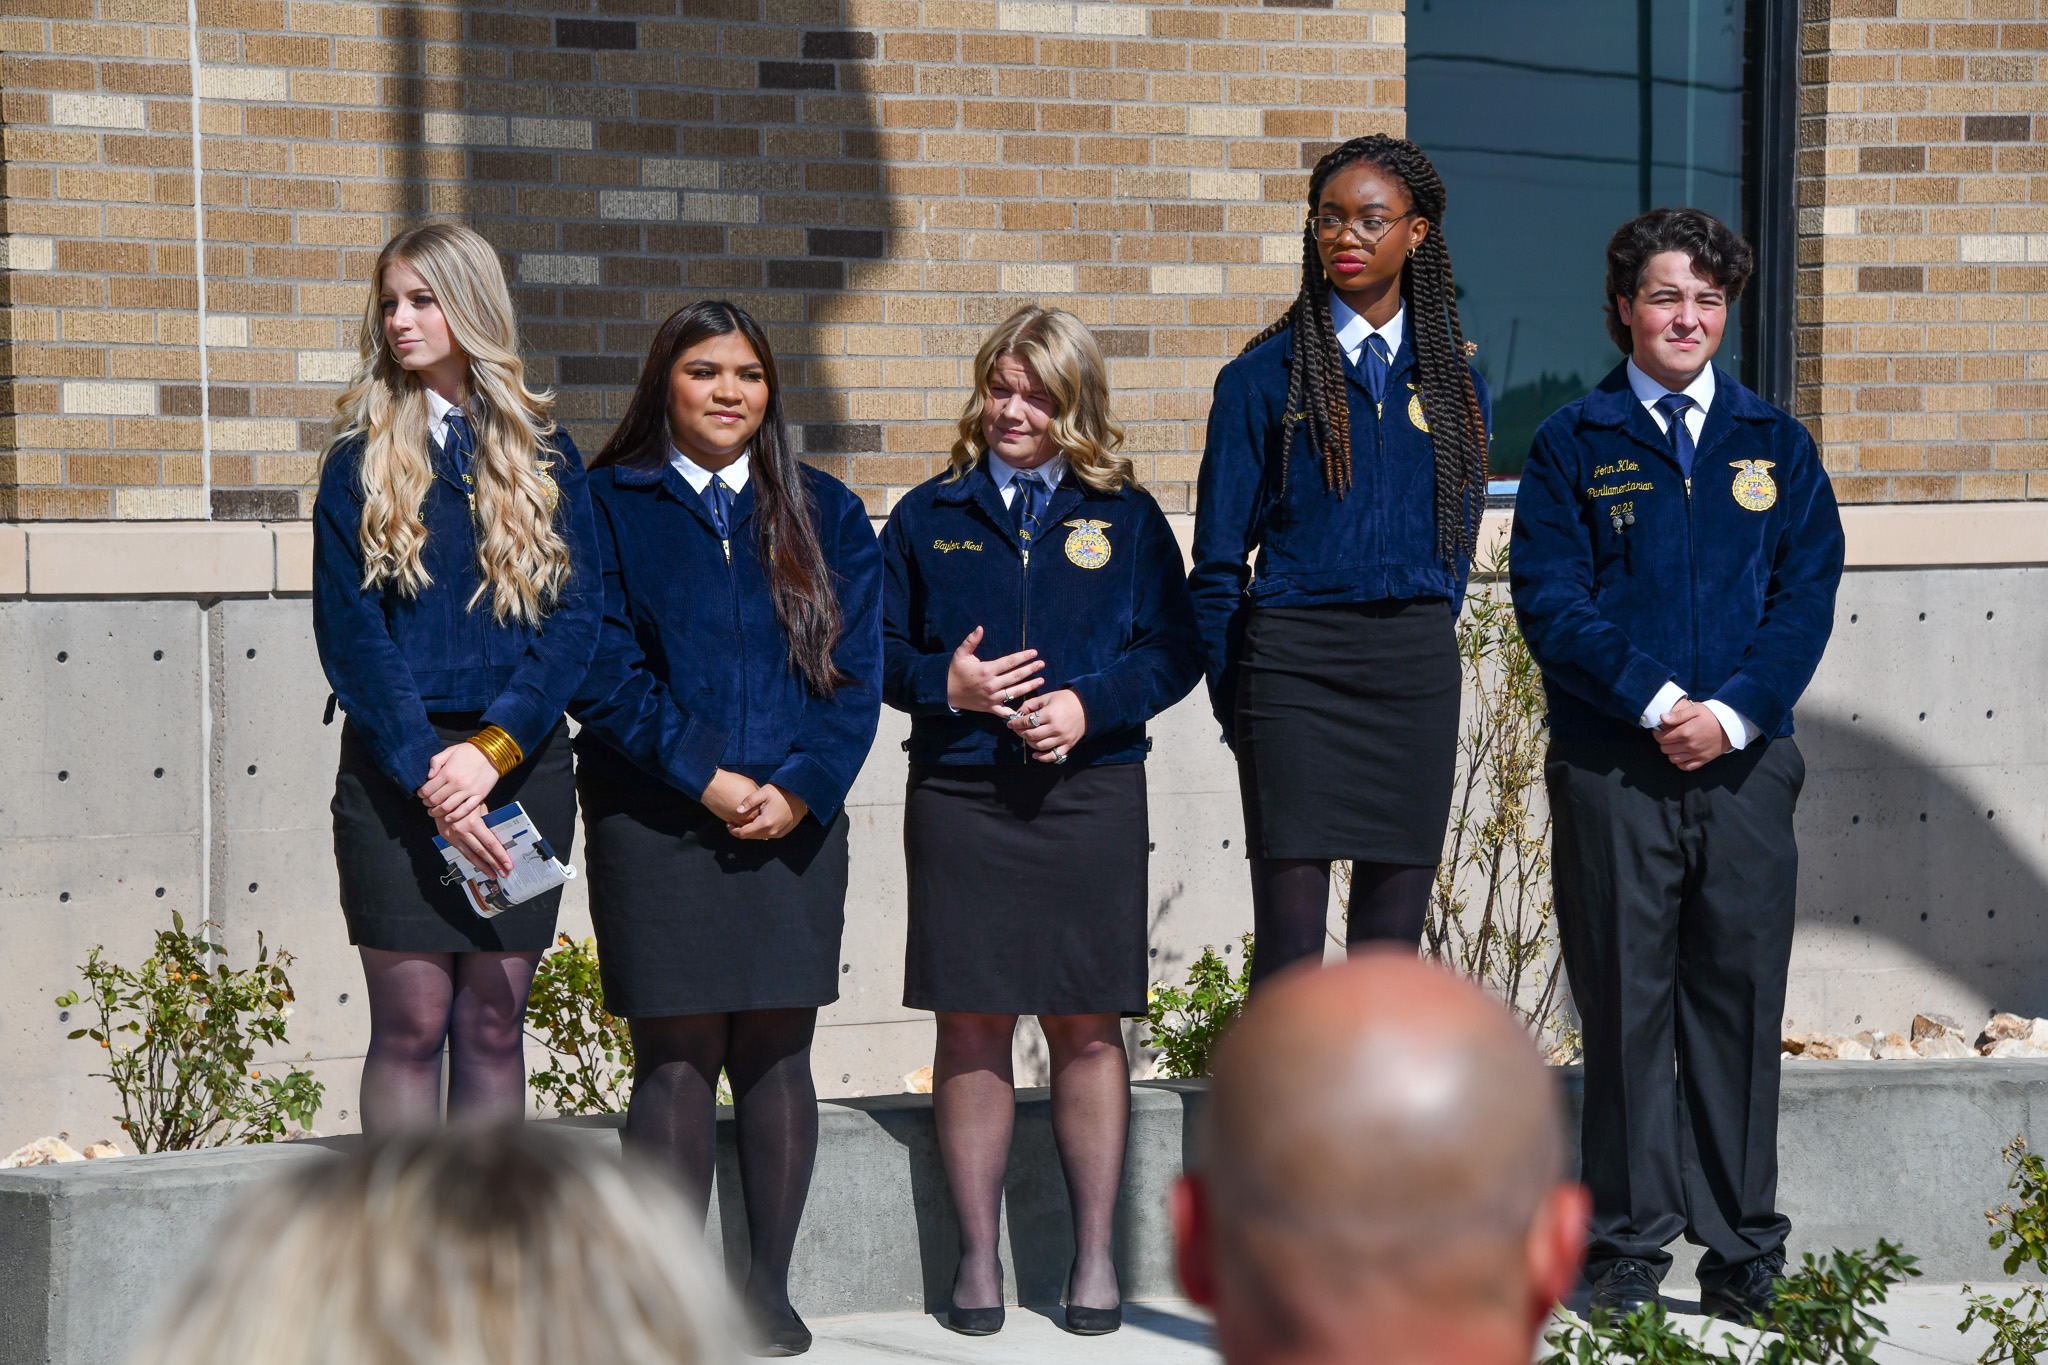 Ag students standing at ribbon cutting ceremony